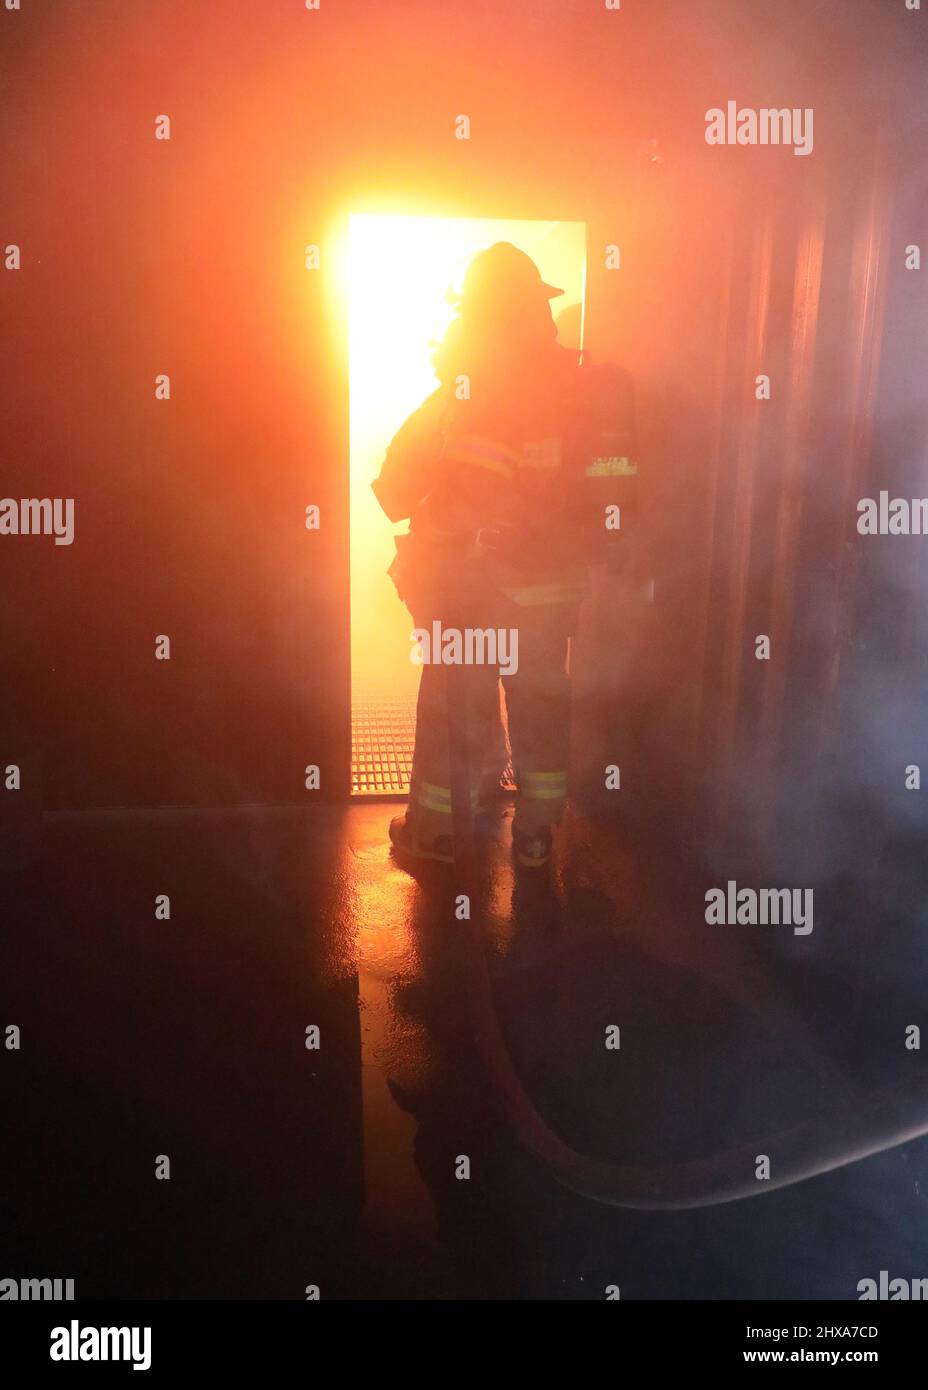 220223-N-OH262-0143--FORT EUSTIS, Va. (February 23, 2022)--Newly hired Civil Service Mariners (CIVMAR) use a fire hose to extinguish a simulated ship's engine room fire at the Military Sealift Command Training Center East on Joint Base Langley-Fort Eustis, Virginia, Feb. 23. The training evolution was part of the MSC Basic Training Damage Control curriculum, which must be successfully completed prior to sailing in MSC's fleet of ships. (U.S. Navy photo by Bill Mesta/released) Stock Photo